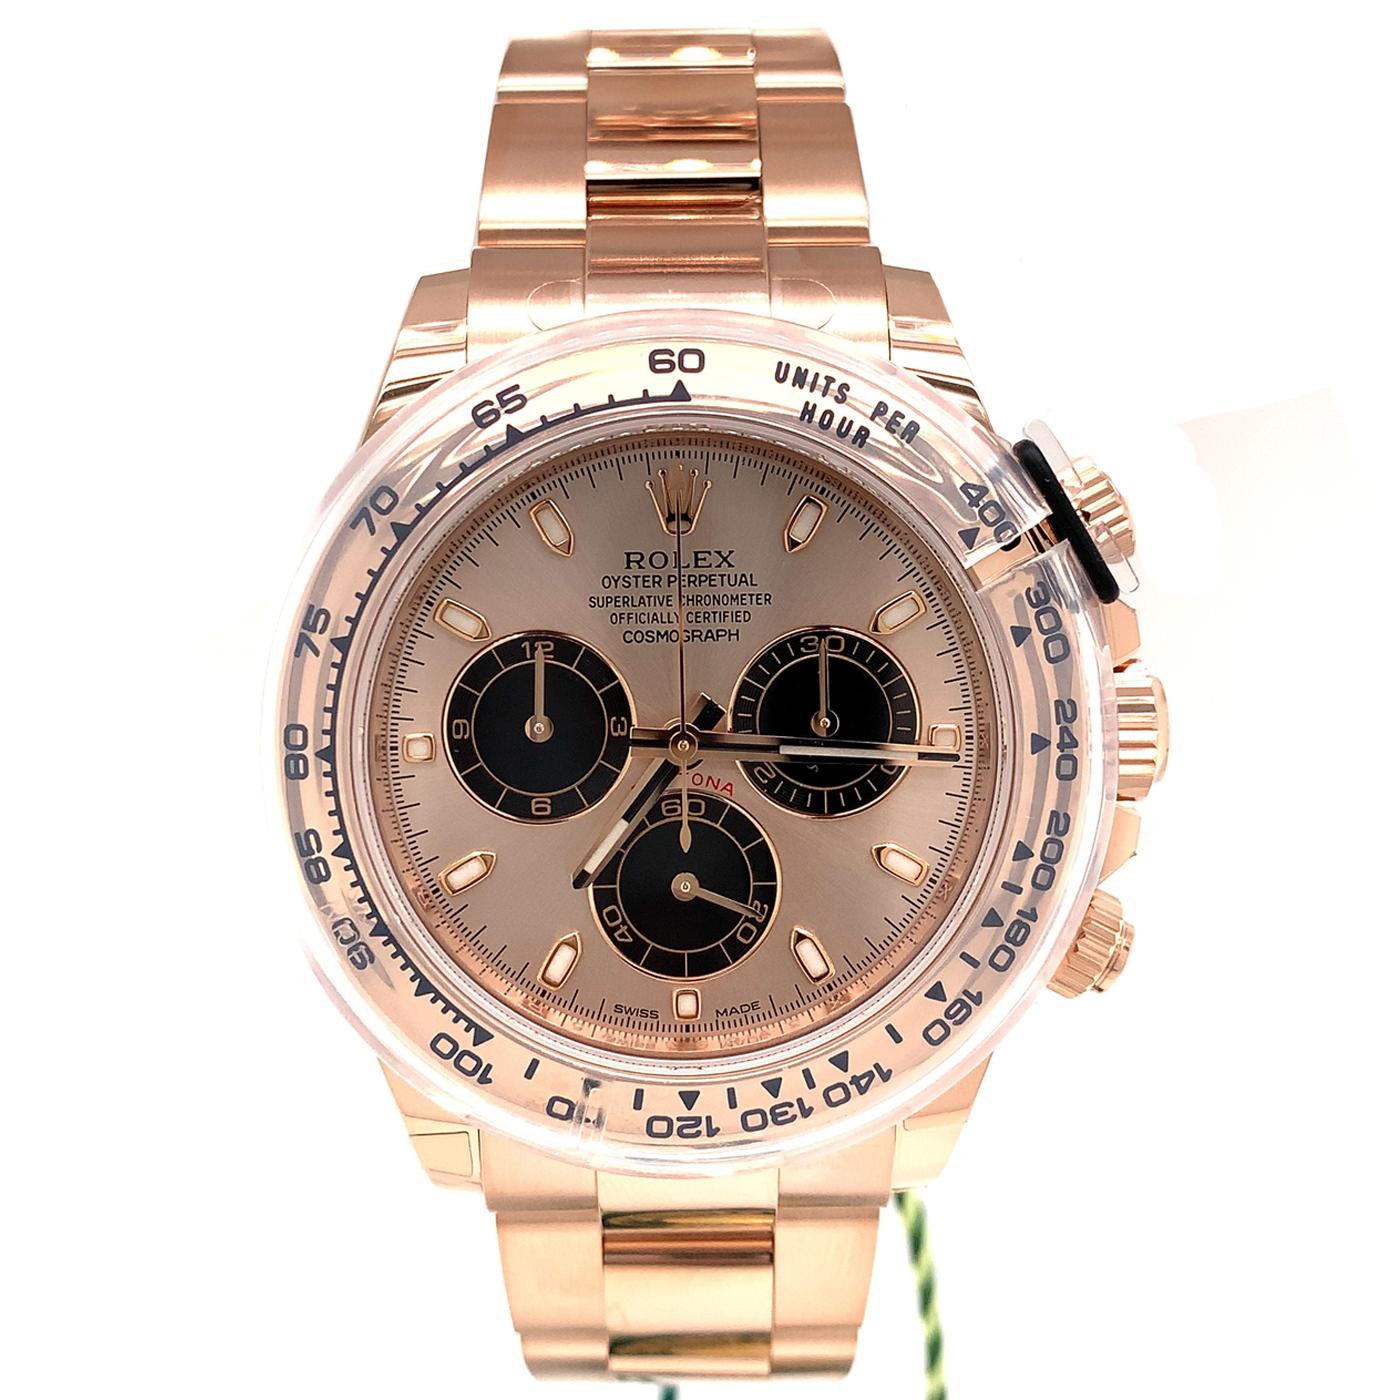 This Rolex Oyster Perpetual Cosmograph Daytona in 18 ct rose gold, with white mother-of-pearl, diamond-set dial, and an Oyster bracelet features an 18 ct rose gold bezel with engraved tachymetric scale. This chronograph was designed to be the